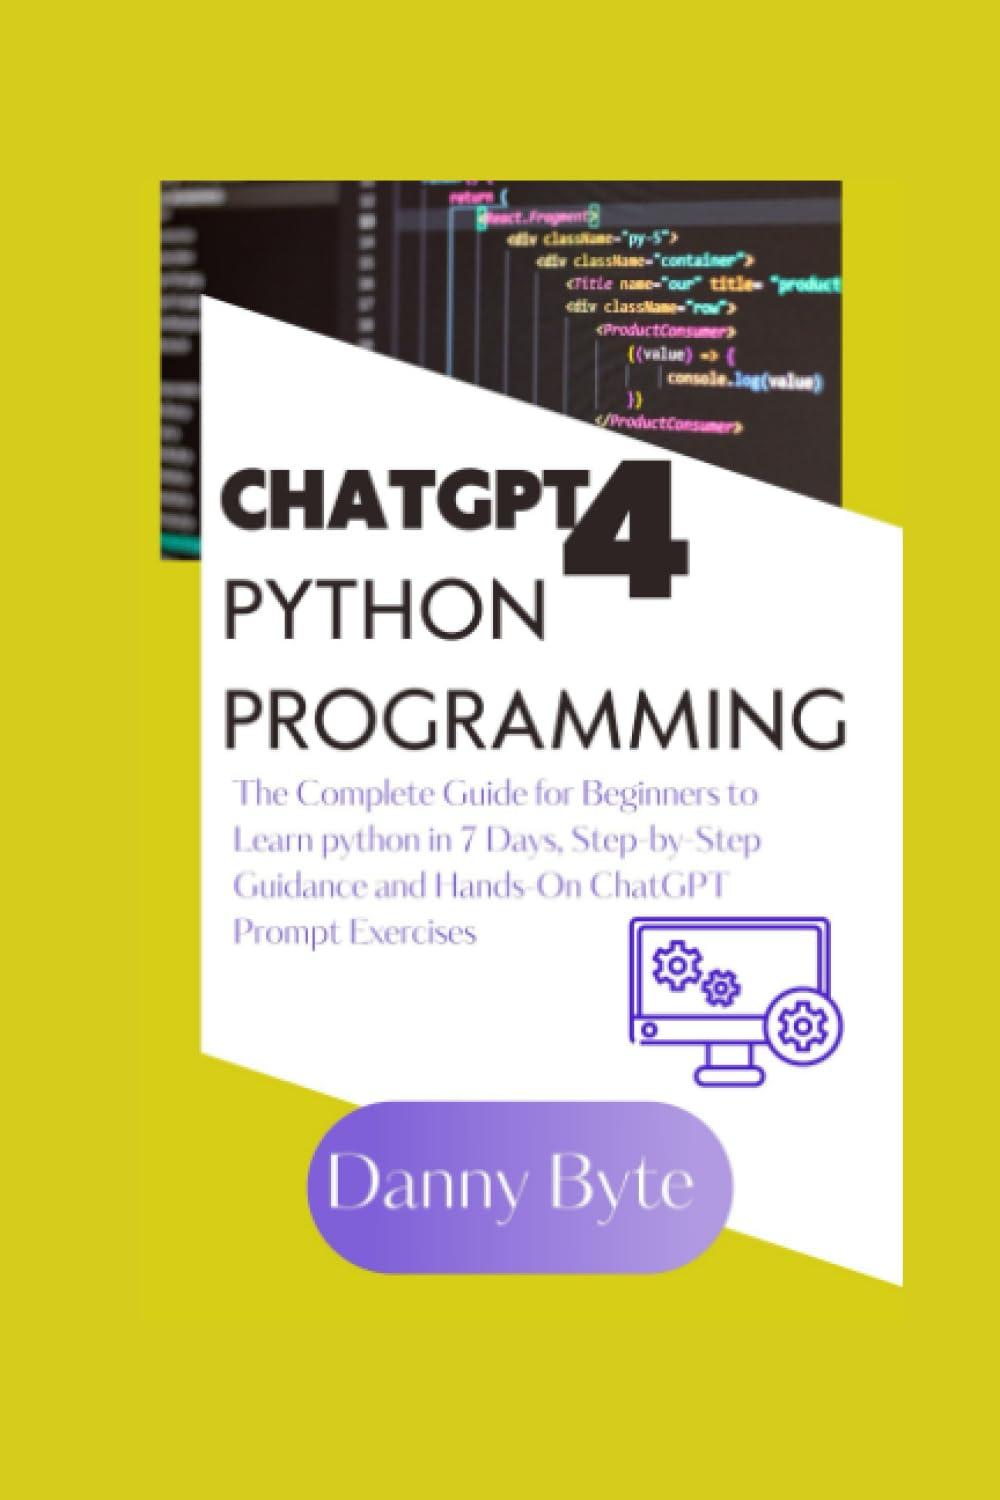 chatgpt 4 python programming the complete guide for beginners to learn python in 7 days step by step guidance